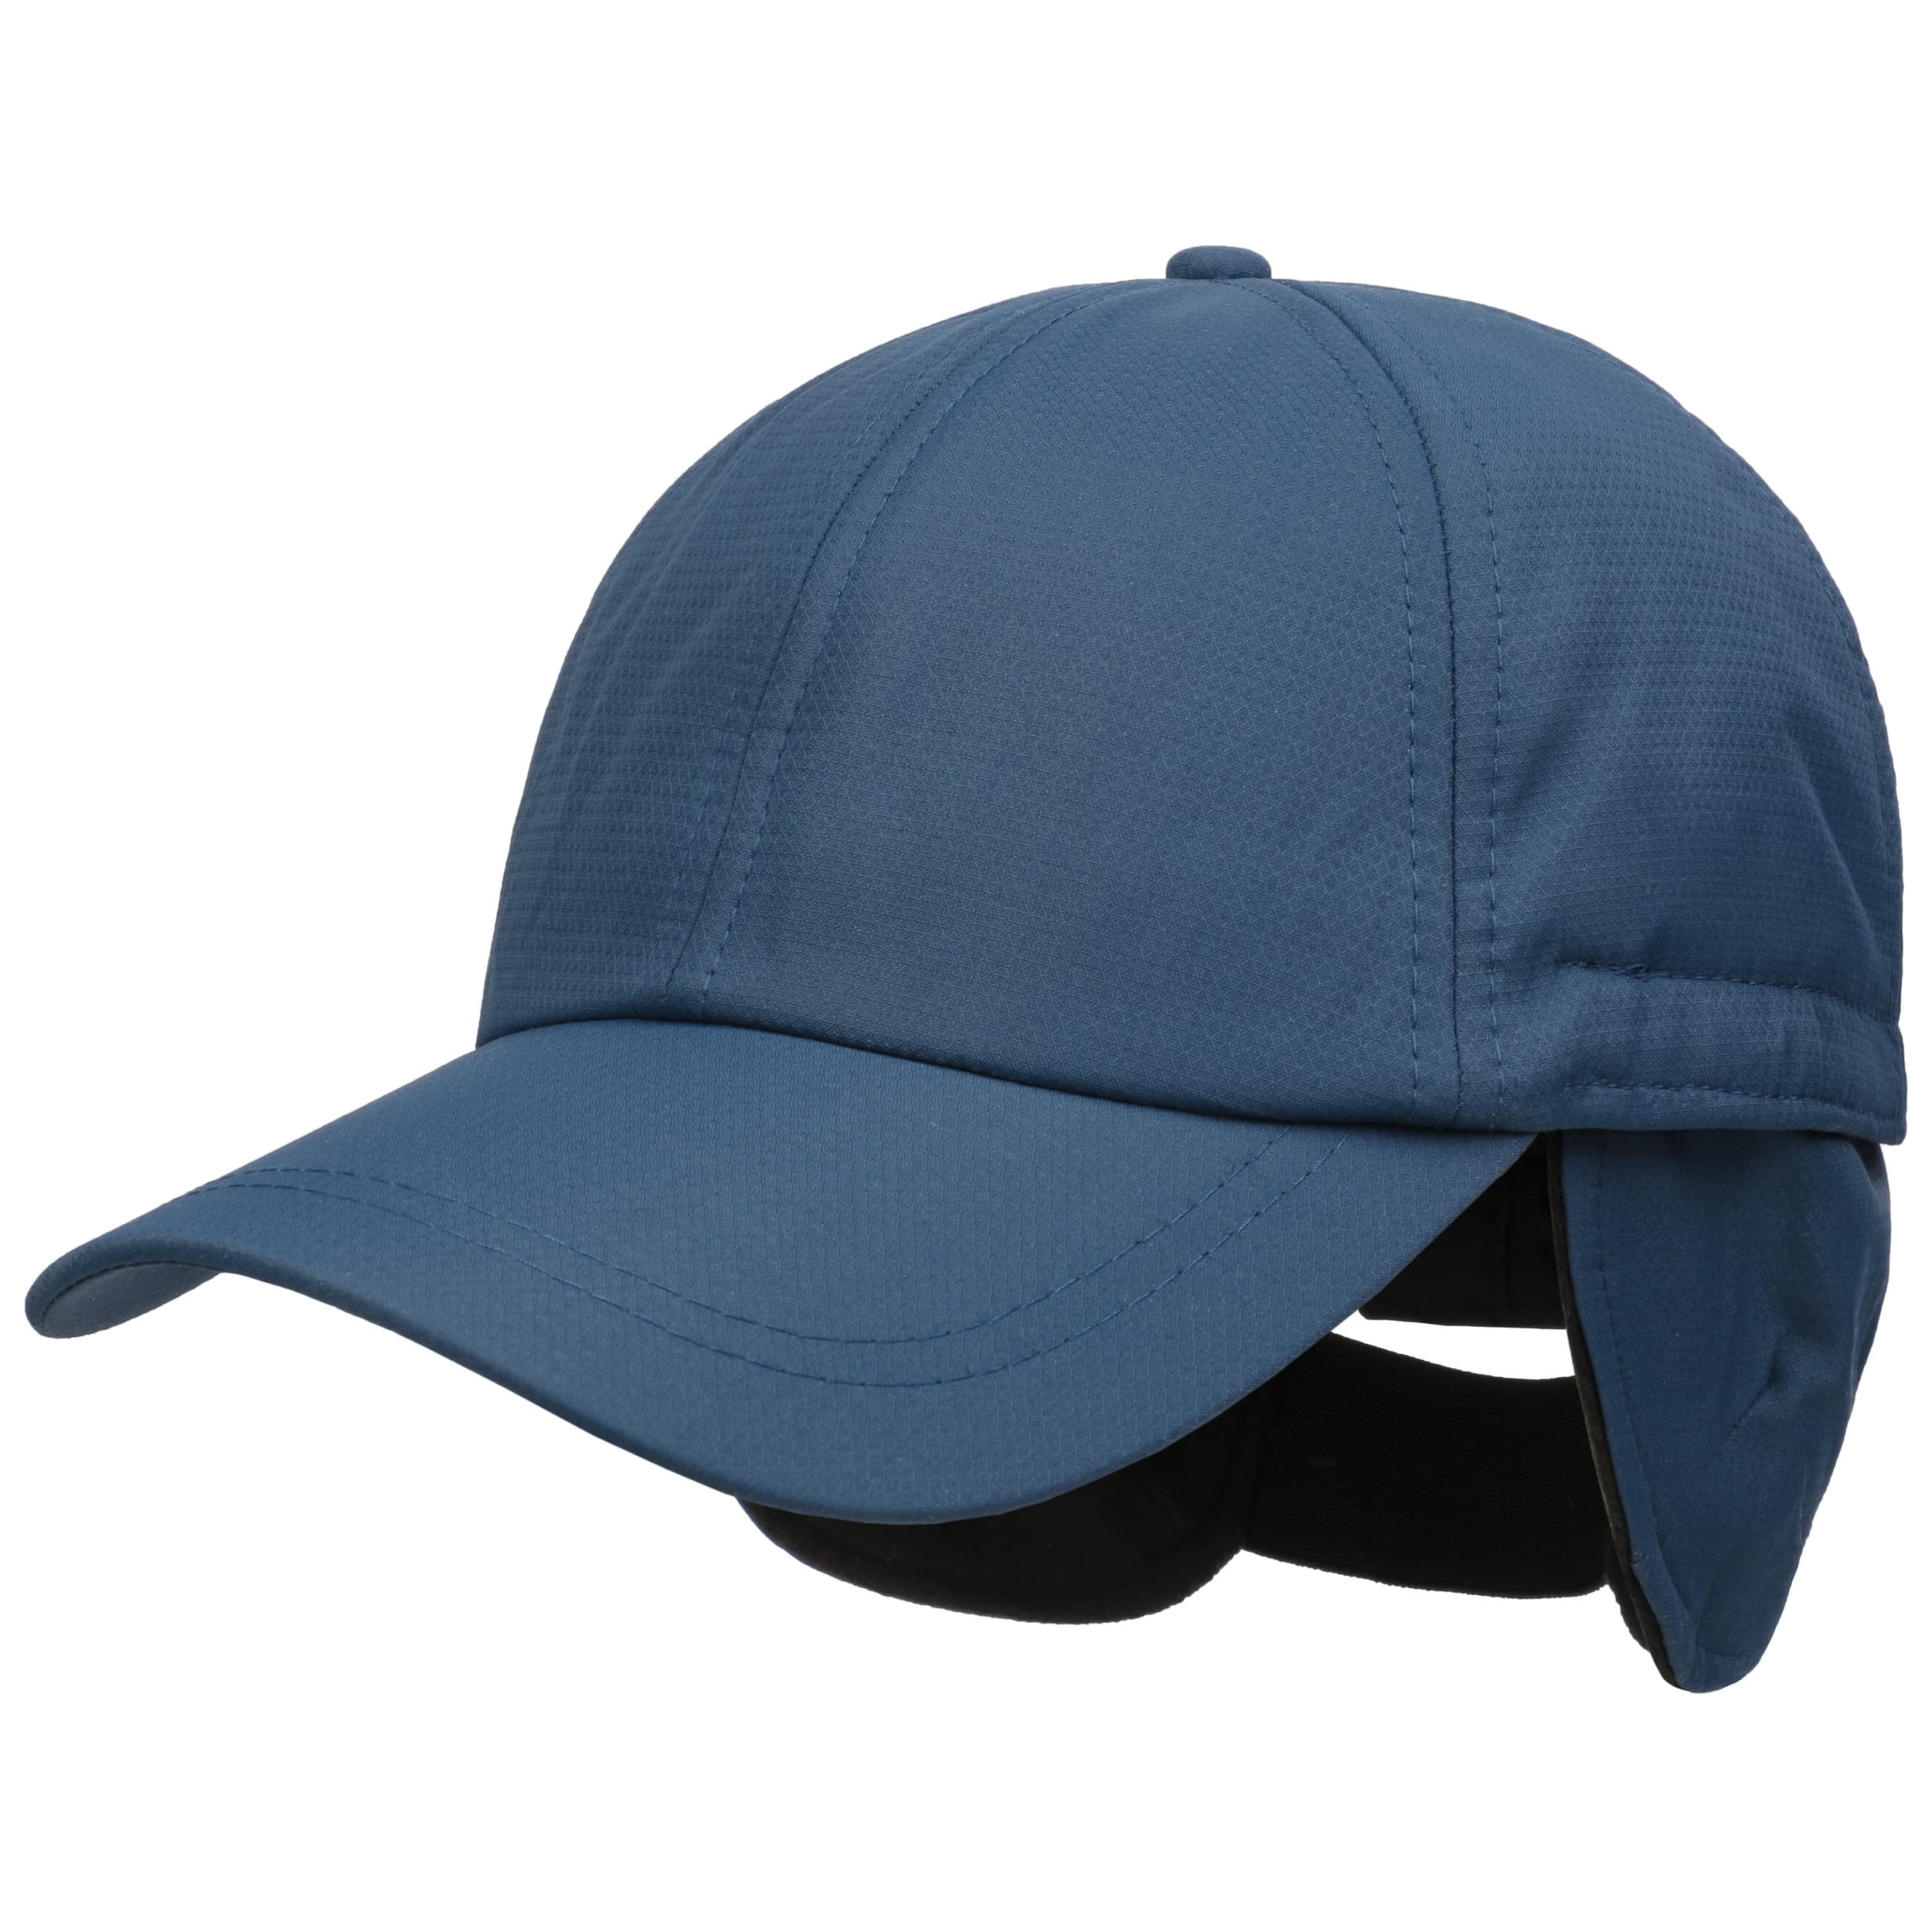 3M Thinsulate Cap mit Ohrenklappen by Lipodo - 29,95 €